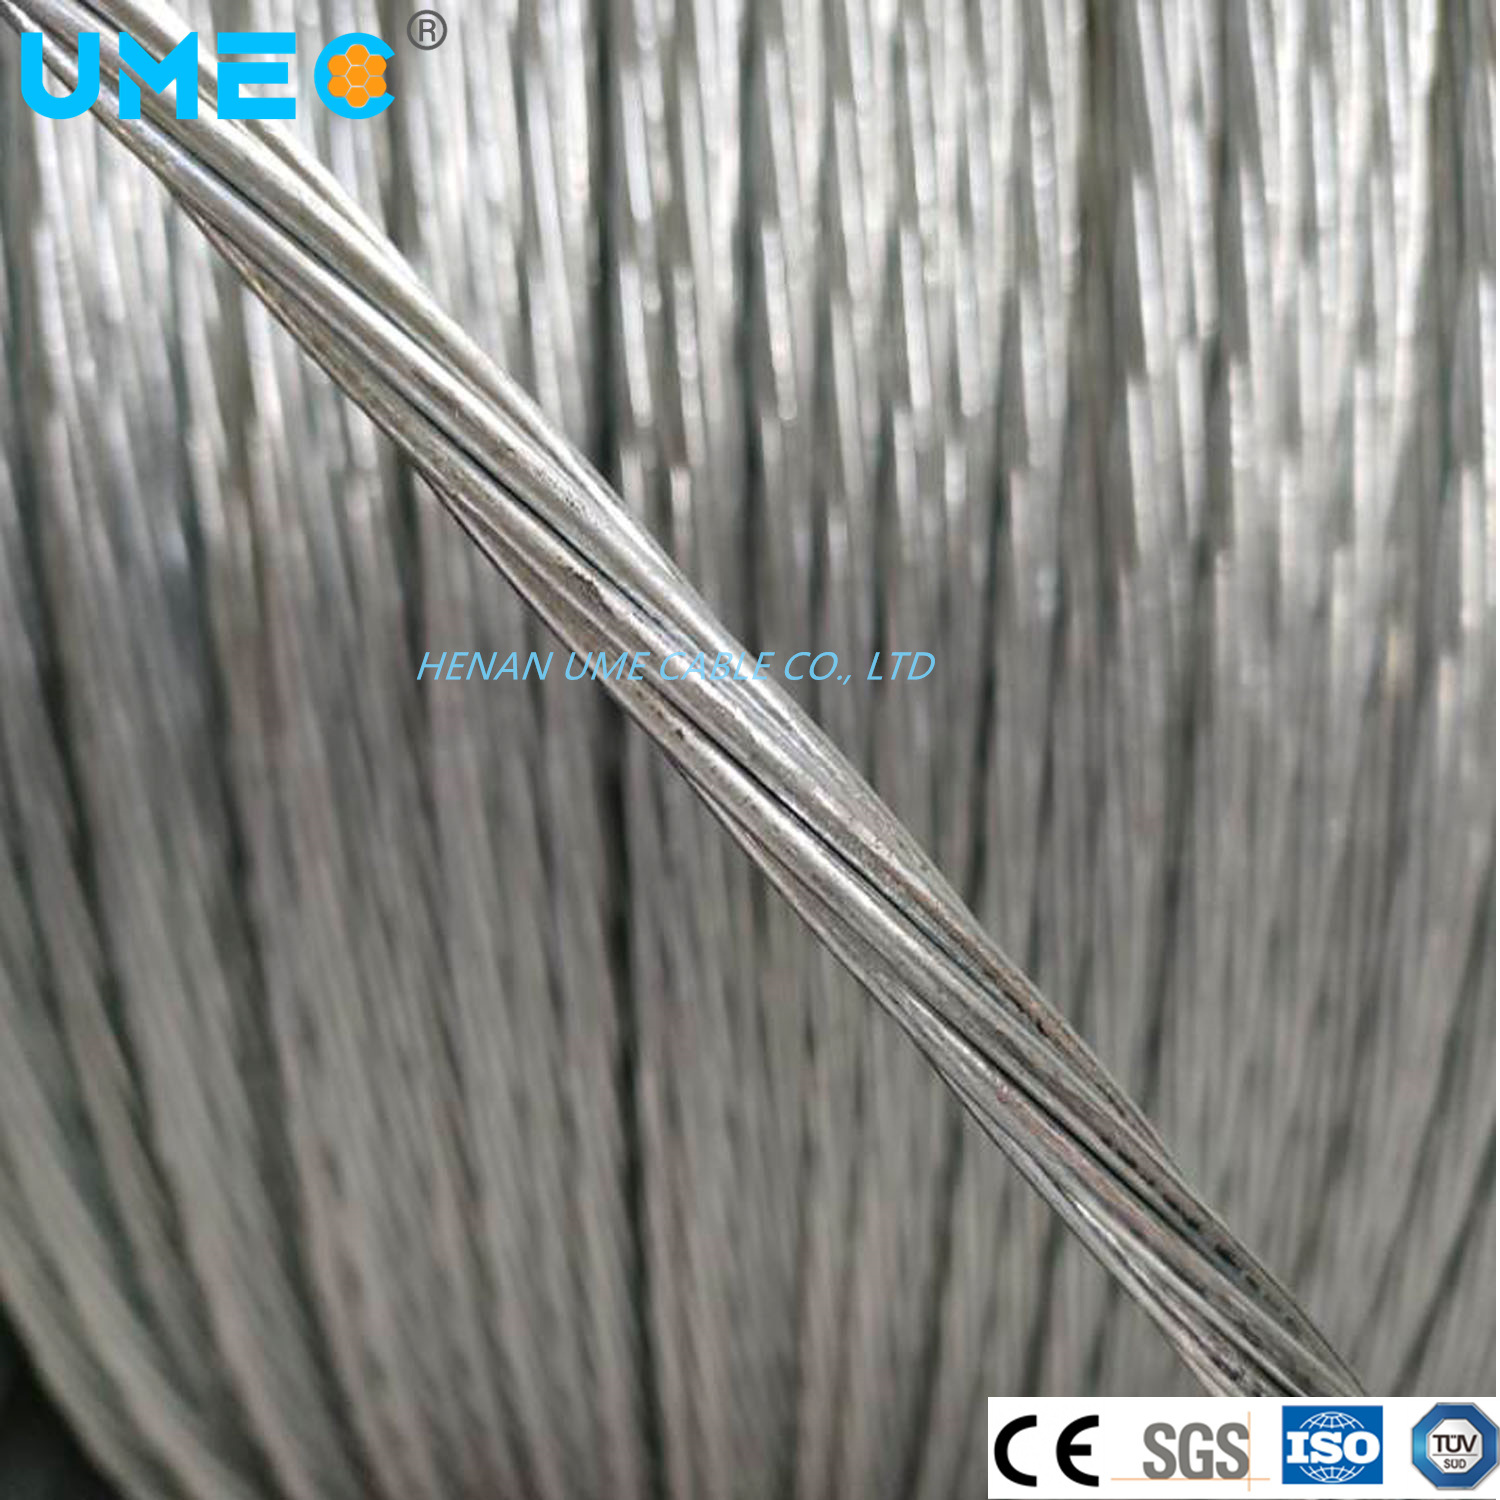 Electric High Carbon Steel Gsw ASTM A475 Overhead Ground Lines Galvanized Steel Wire Stranded for ACSR Conductor Electrical Cable